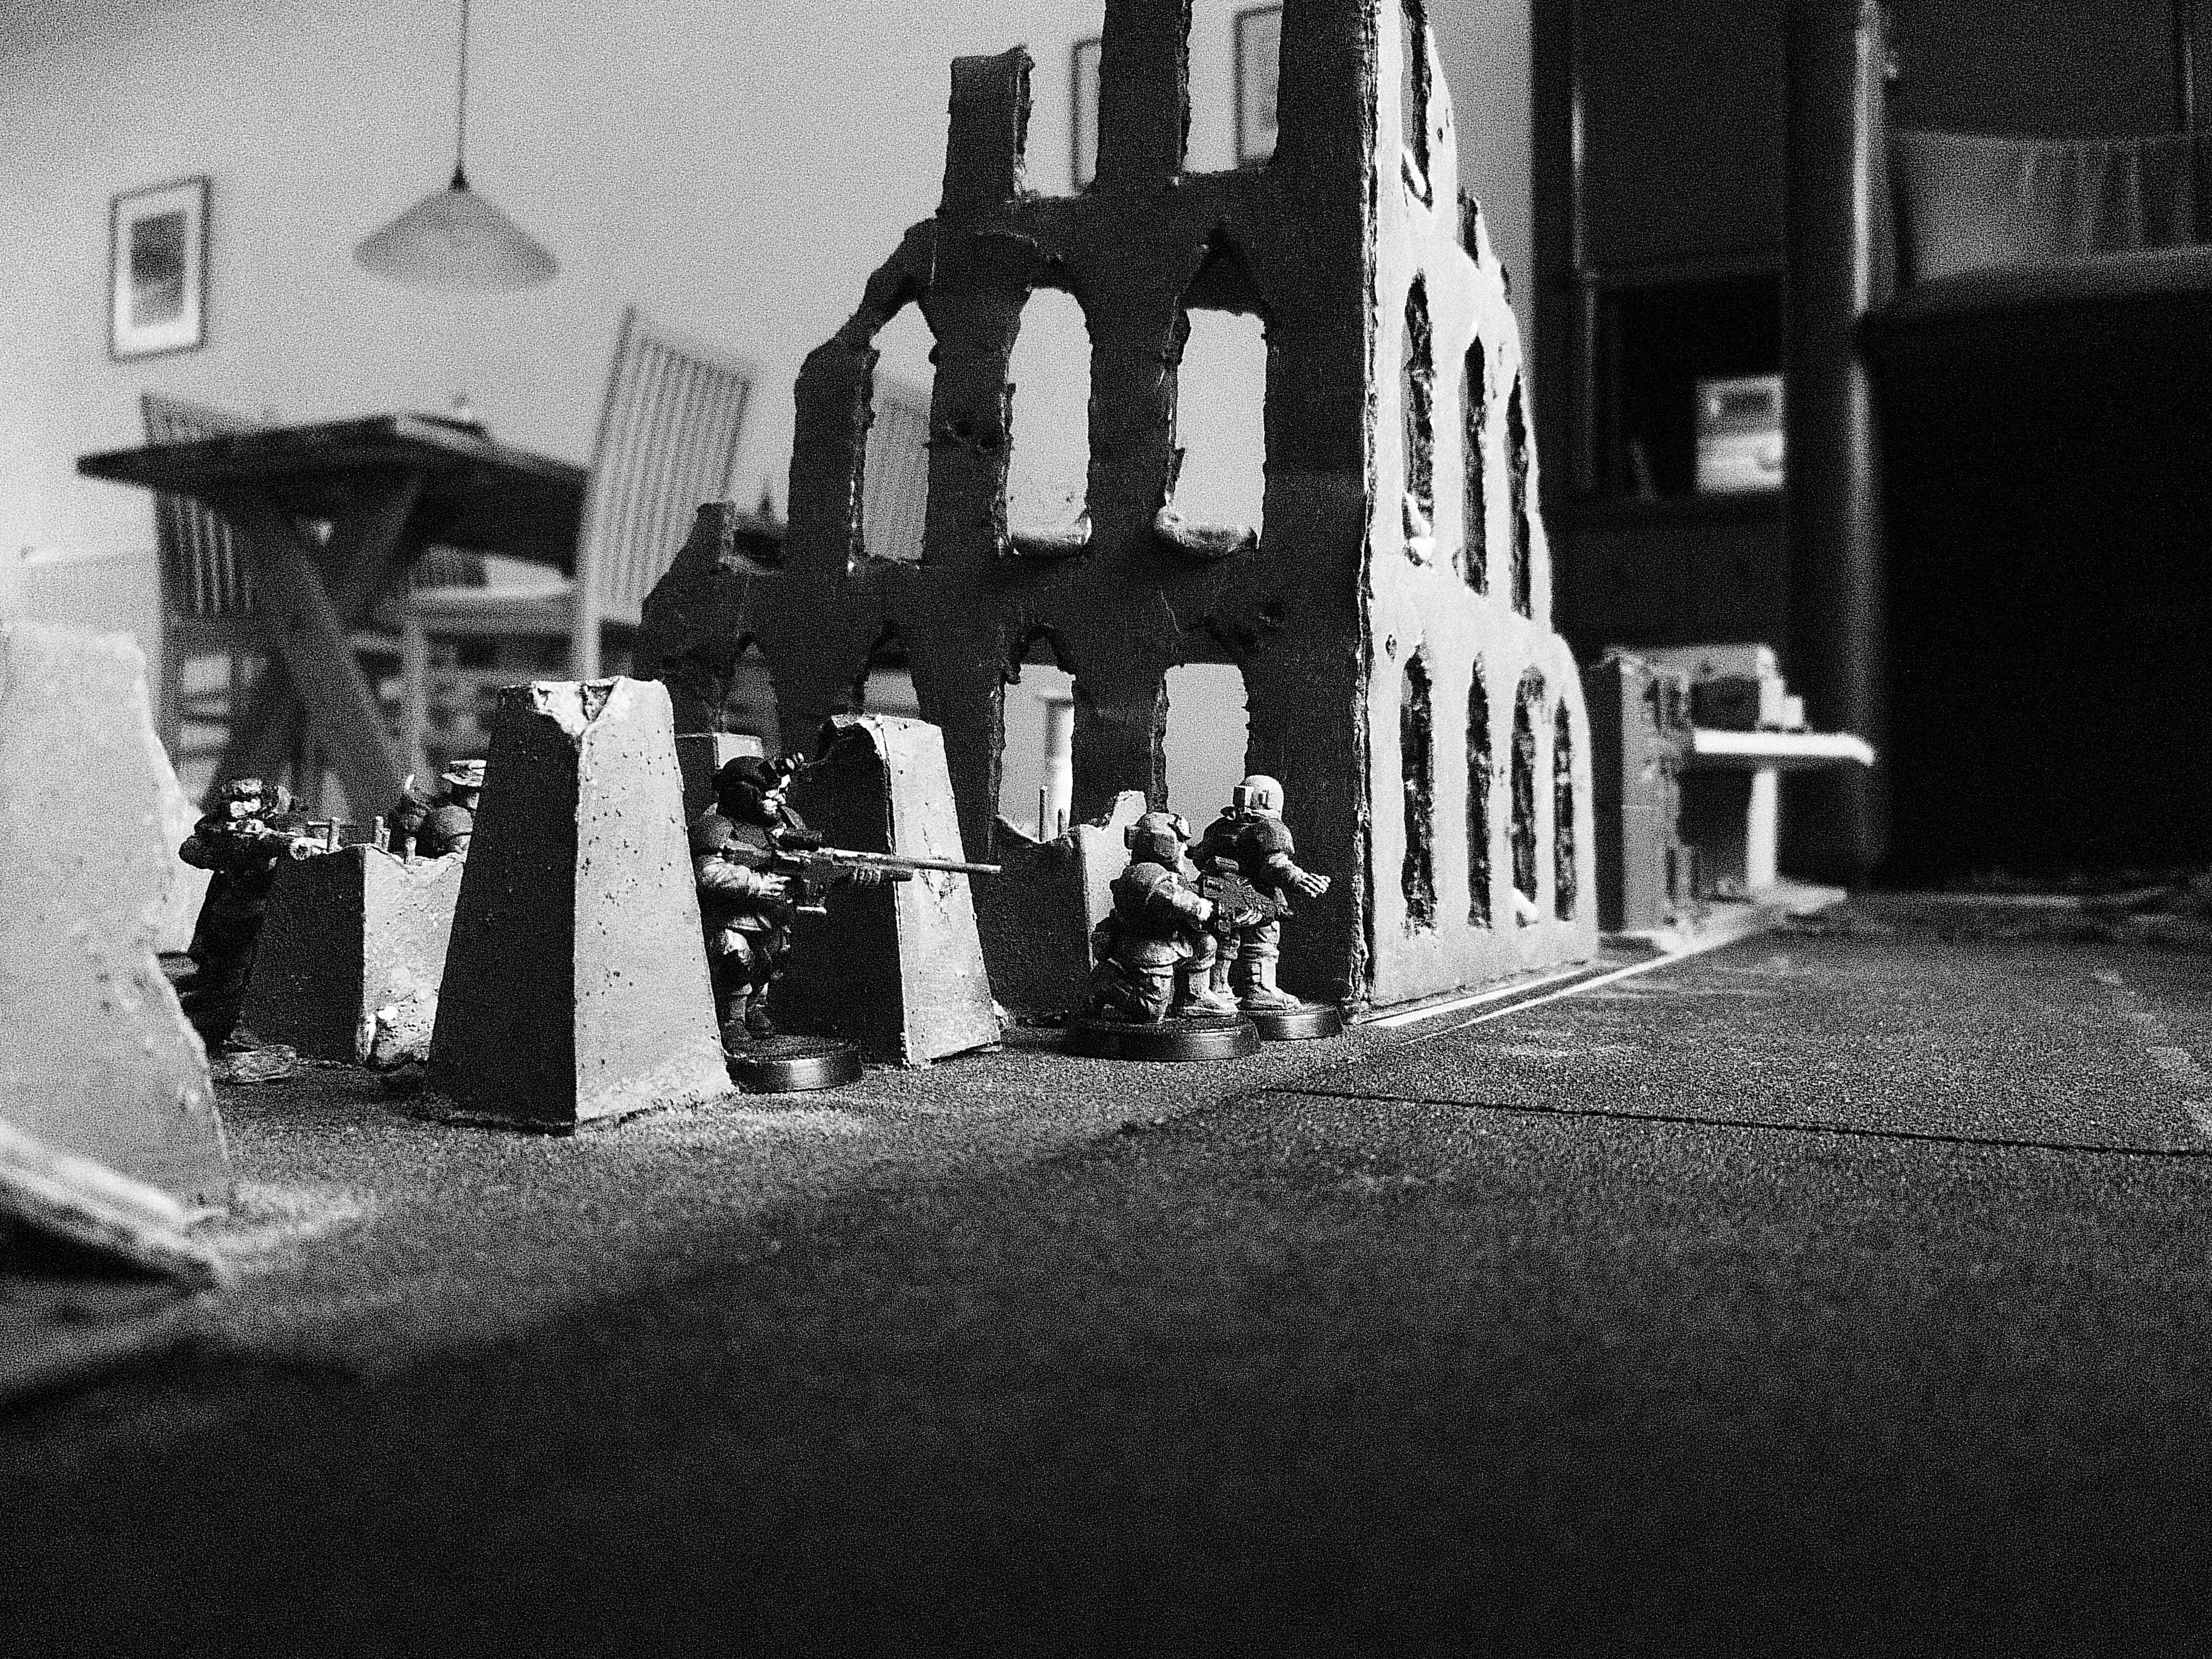 Aquila, Barricade, Buildings, Chimera, Cities Of Death, City, Dragon Teeth Tank Traps, Guardsmen, Hotel, Imperial, Imperial Guard, Imperium, Industrial City, Industry, Lander, Landing Pad, Ruined, Ruins, Snipers, Stalingrad, Street, Tank Traps